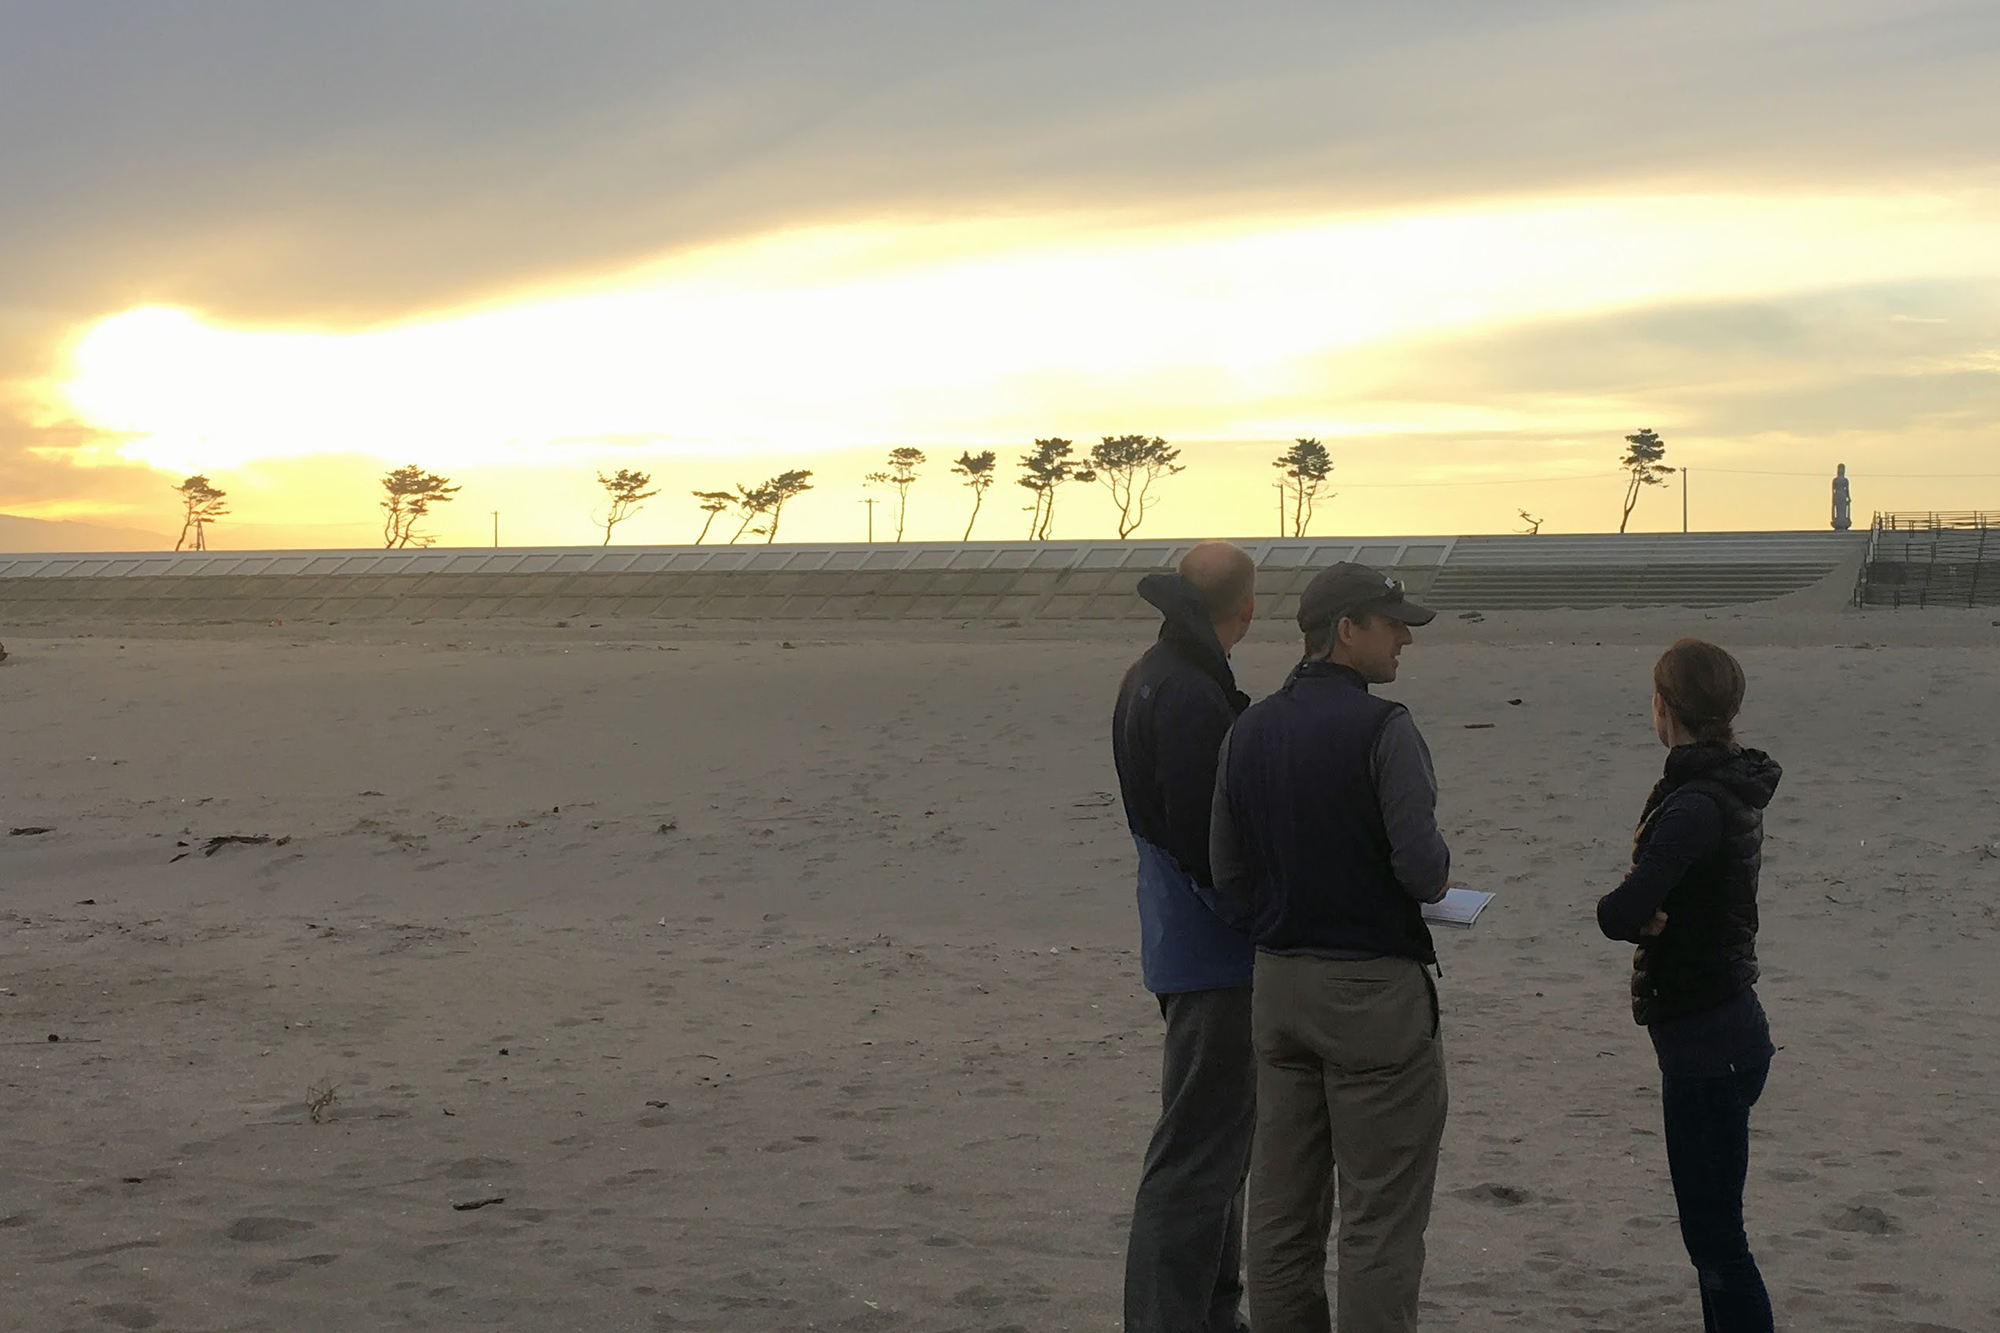 UConn professors on the beach near Sendai. Note the recently raised sea wall and trees with healthy branches indicating the height of the 2011 tsunami wave. (Photo courtesy of William Ouimet)